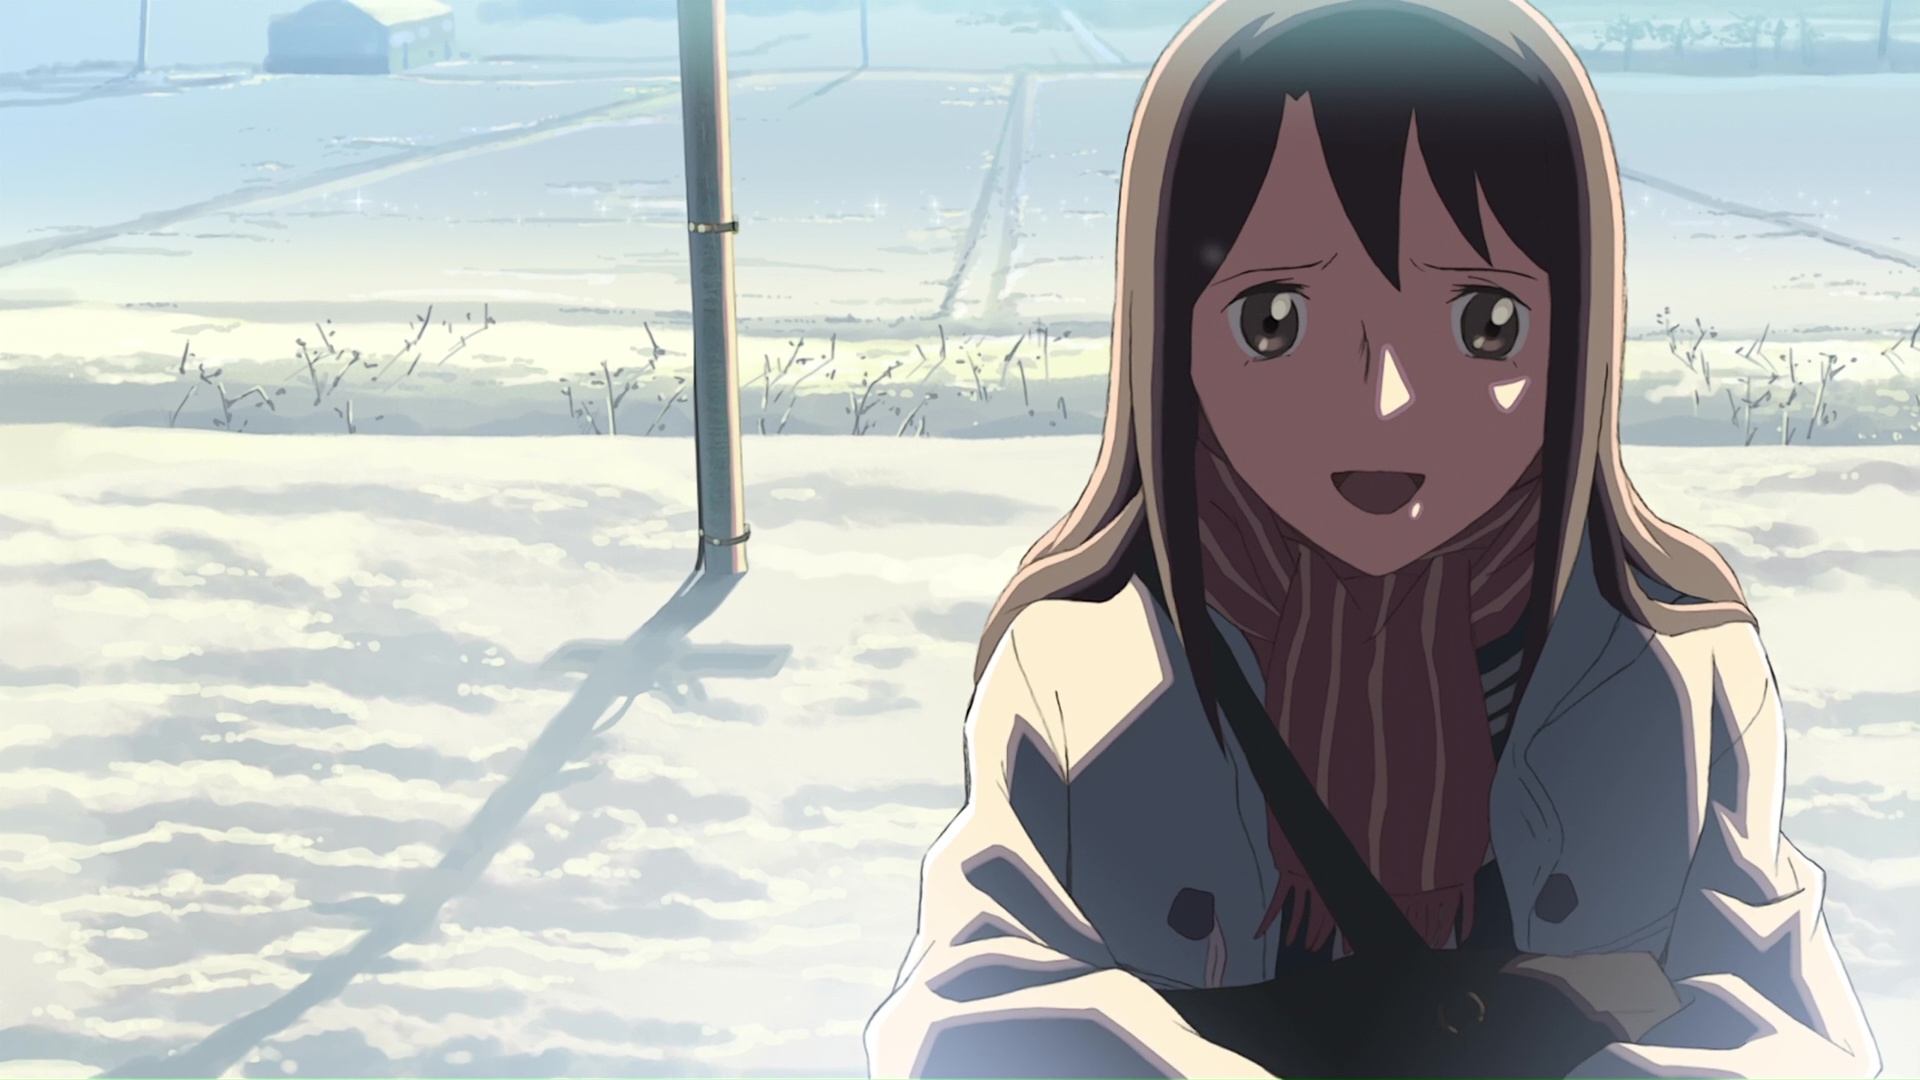 200+] 5 Centimeters Per Second Background s | Wallpapers.com